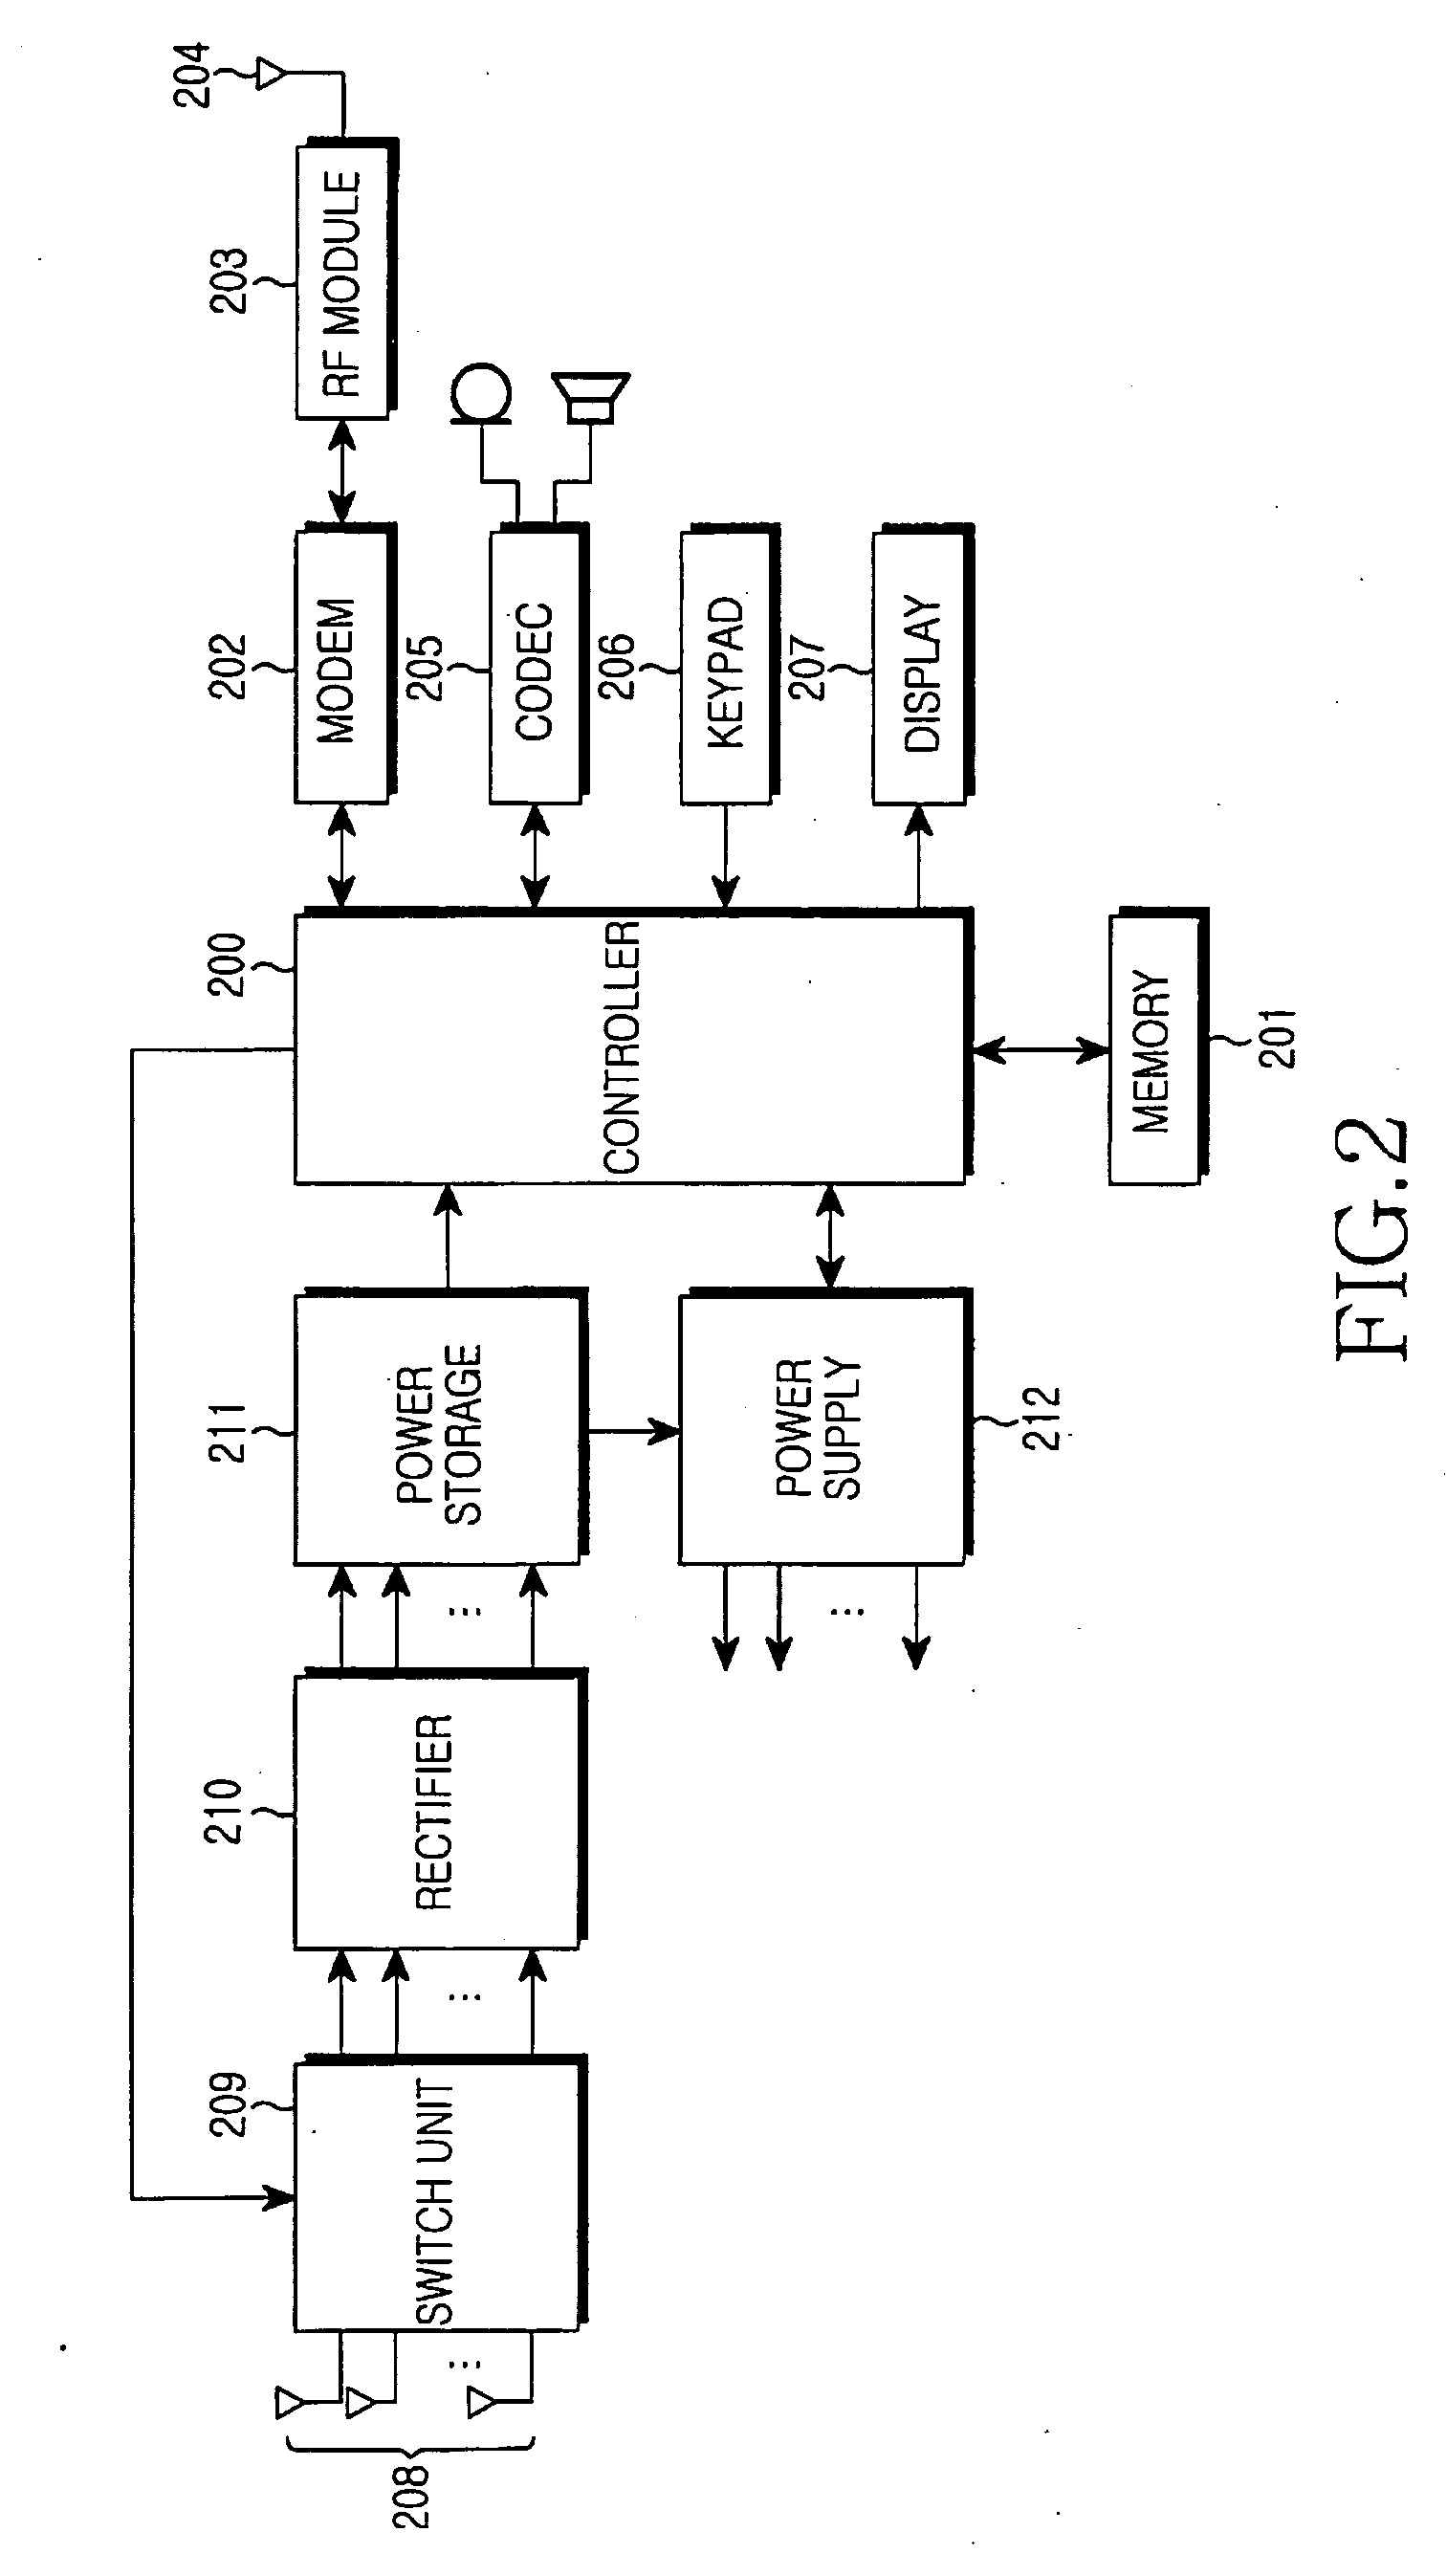 Apparatus and method for using ambient RF power in a portable terminal